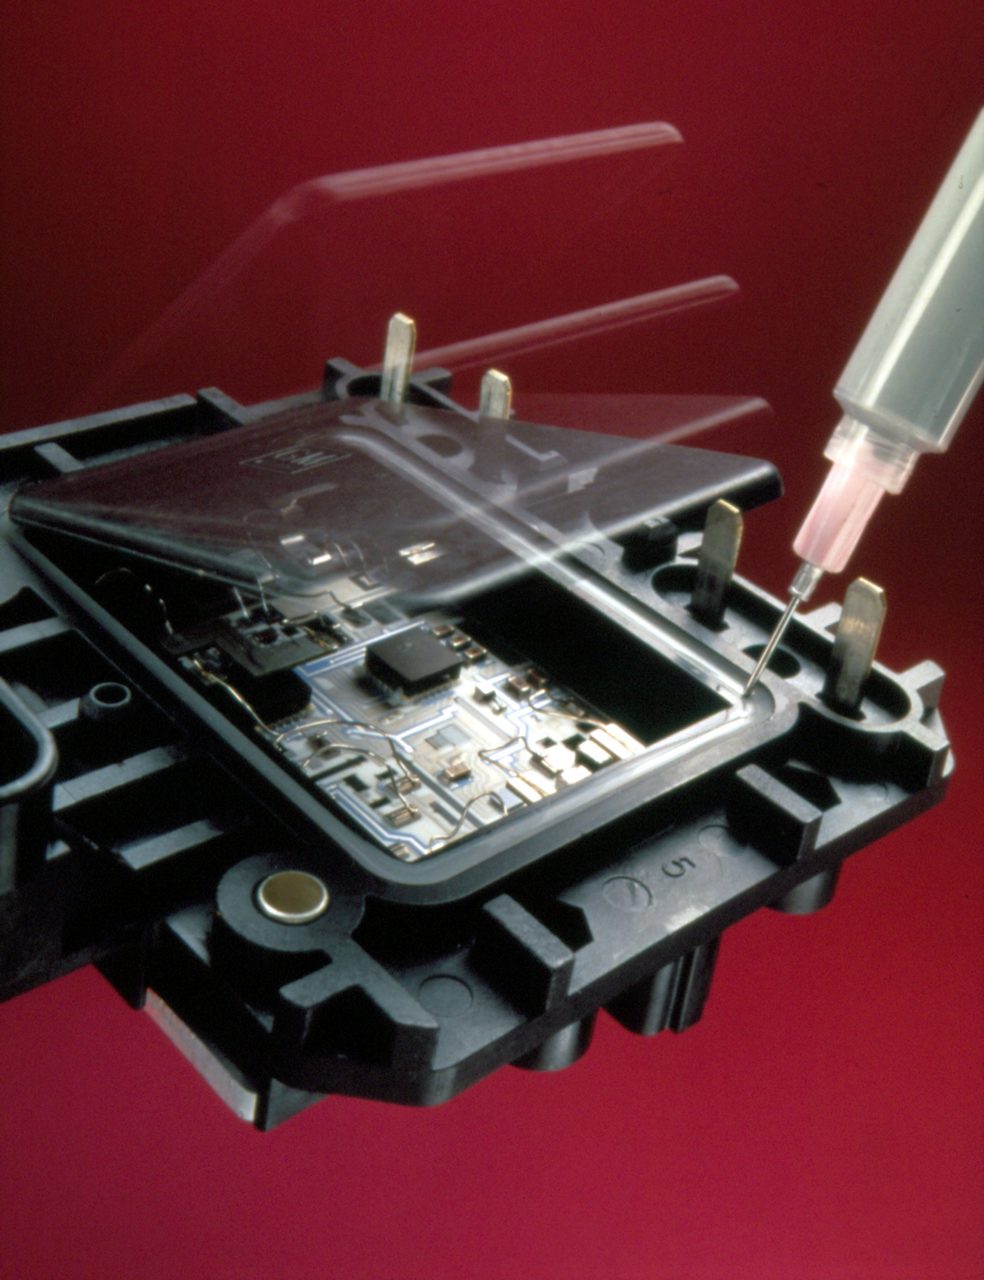 Adhesive applied to seal heatsink assembly.